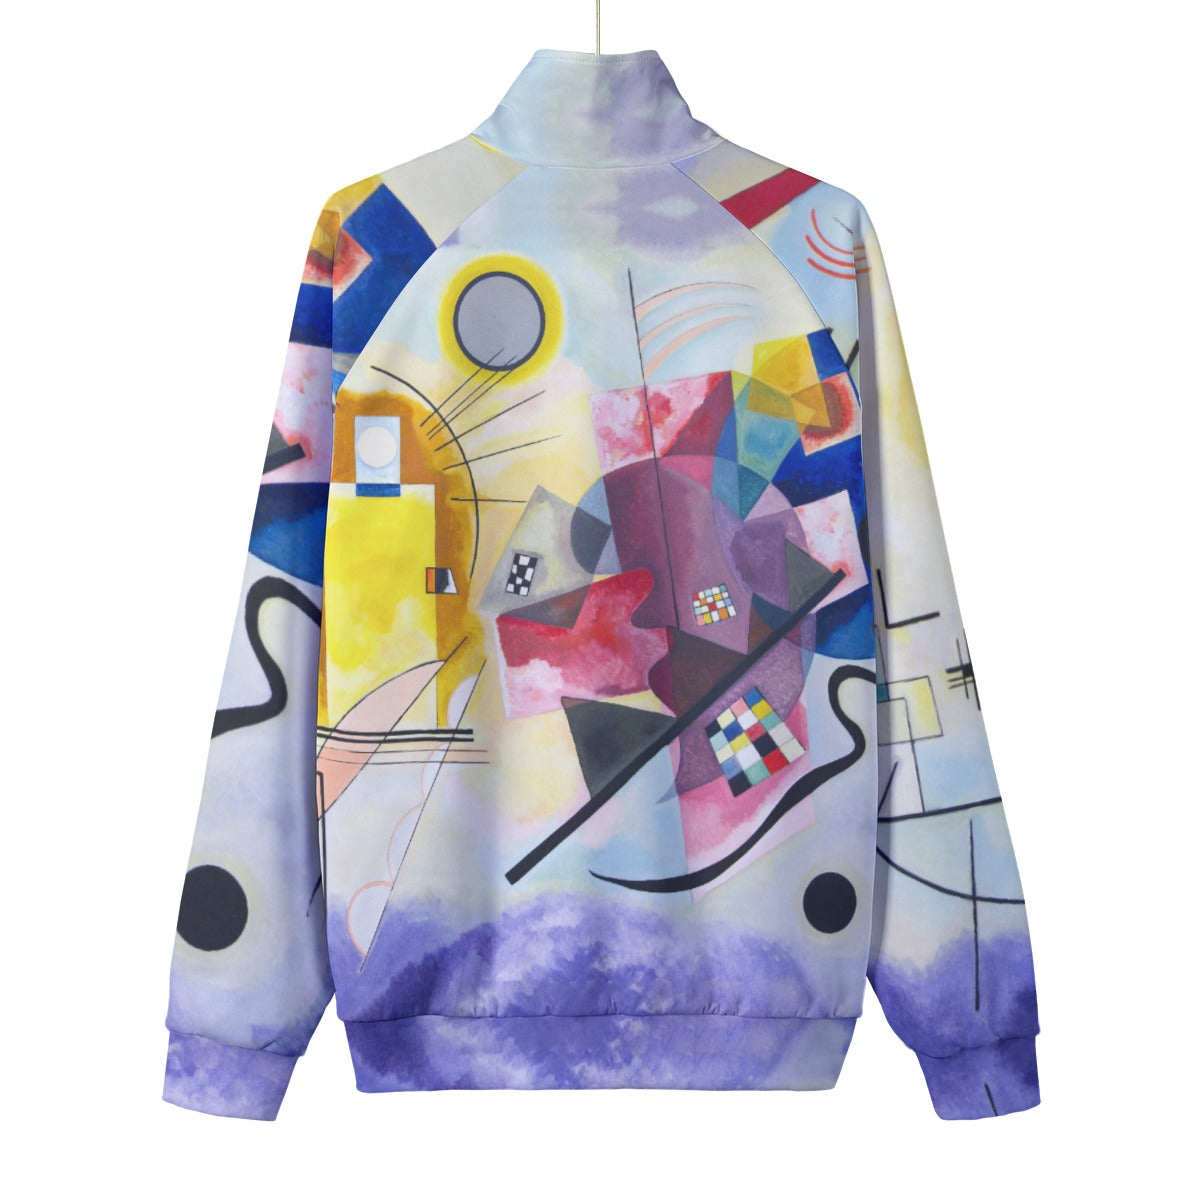 Artistic Outerwear Inspired by Kandinsky